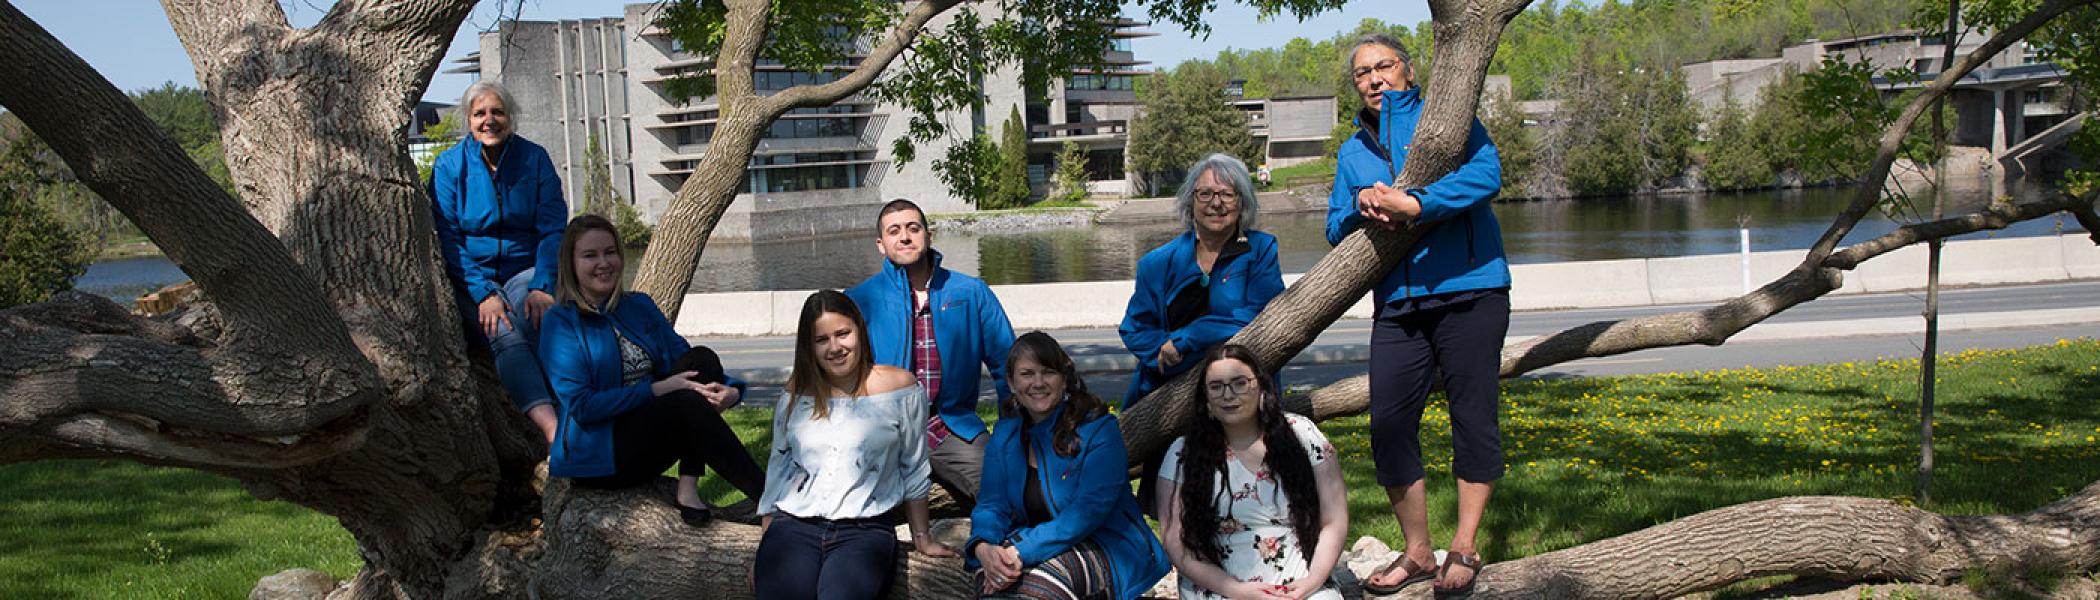 FPHL Department team sitting on a tree outside on a summer day.